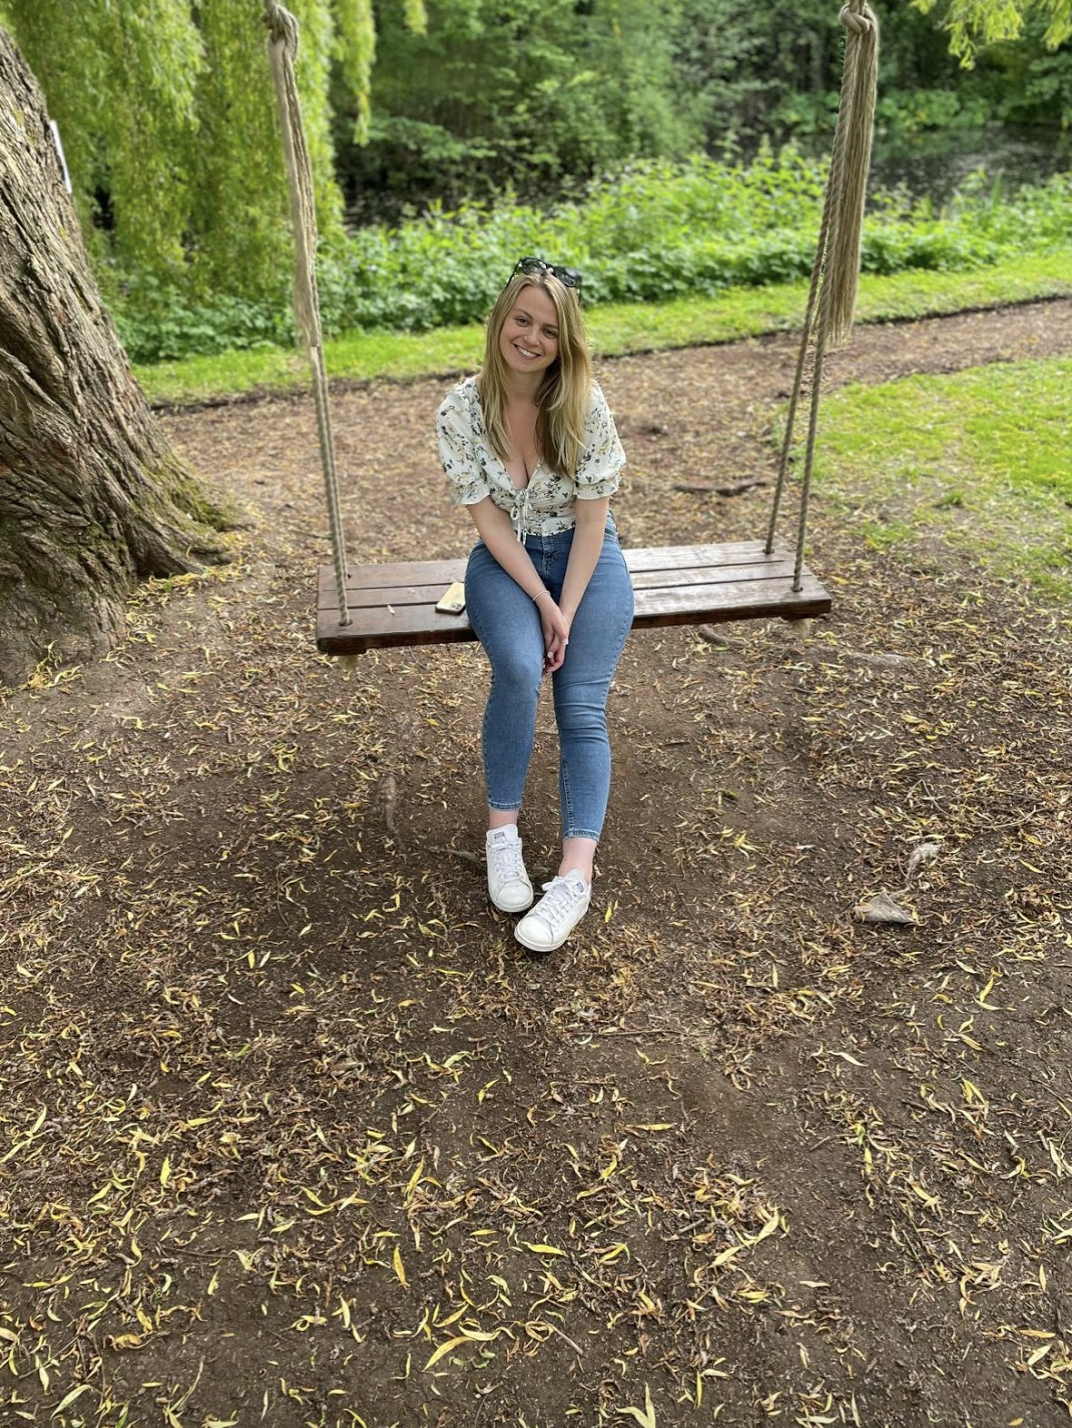 Laura on the swing